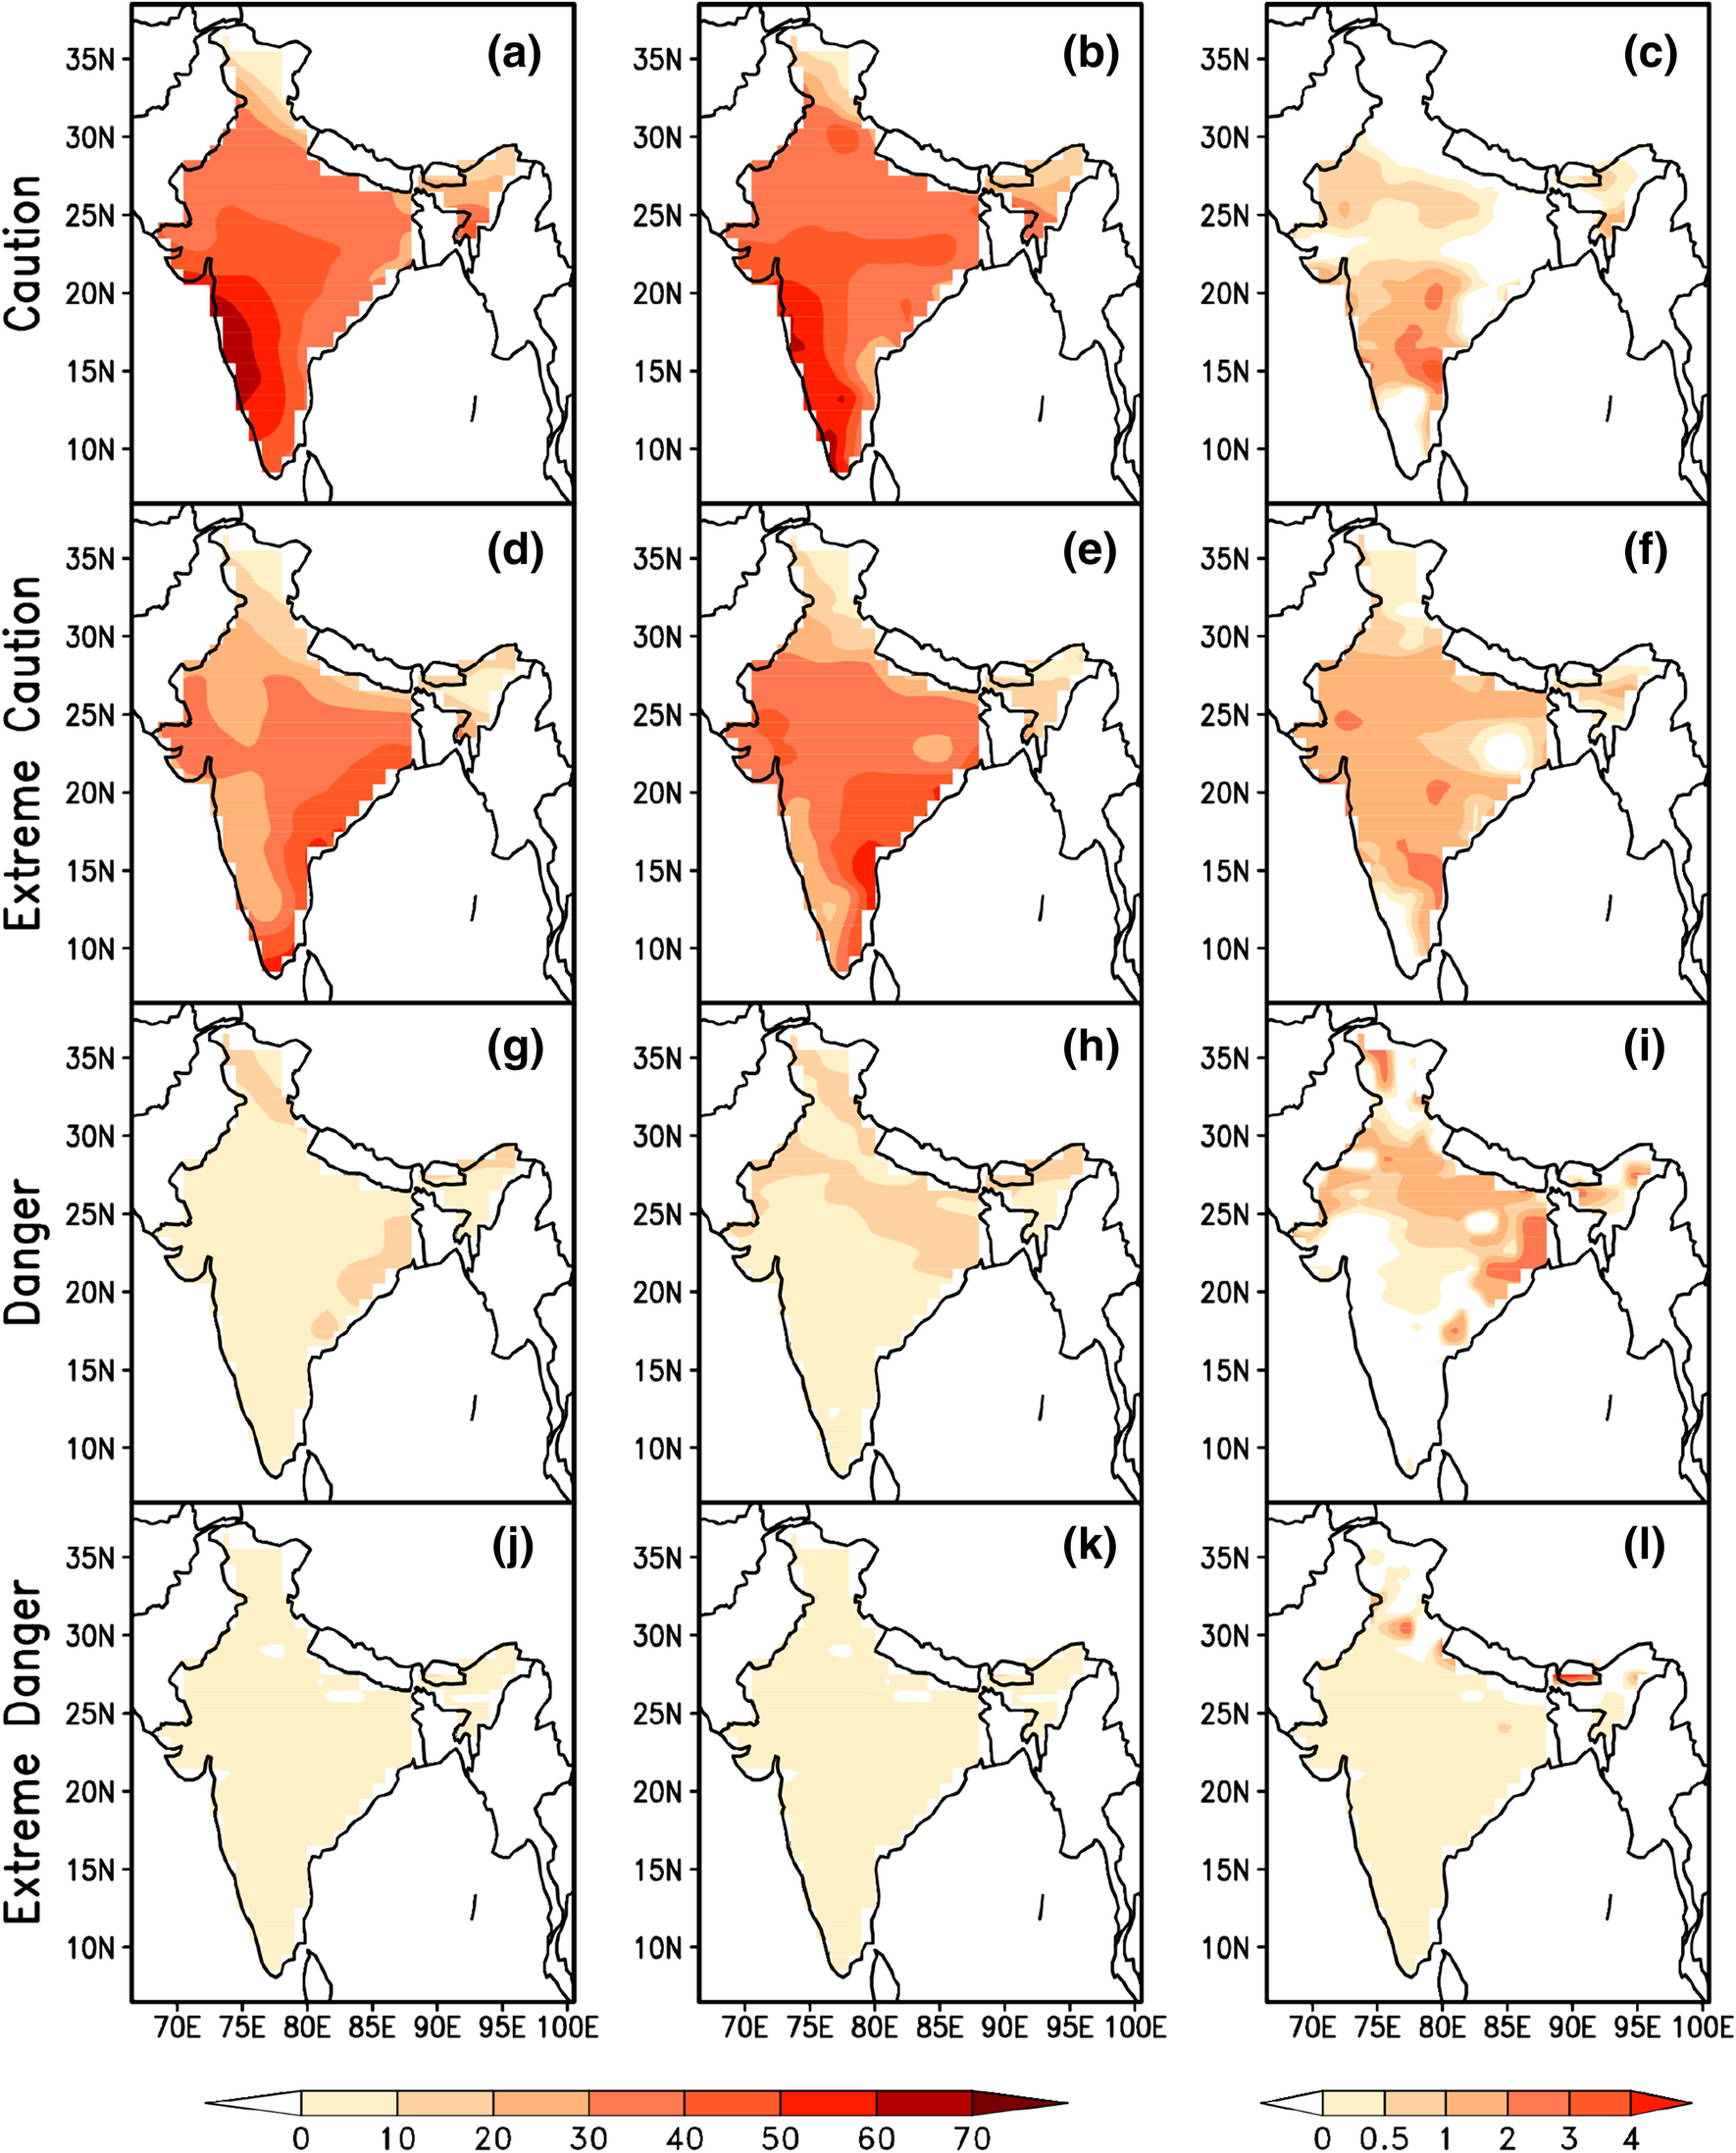 Projections of heat stress and associated work performance over India in  response to global warming | Scientific Reports